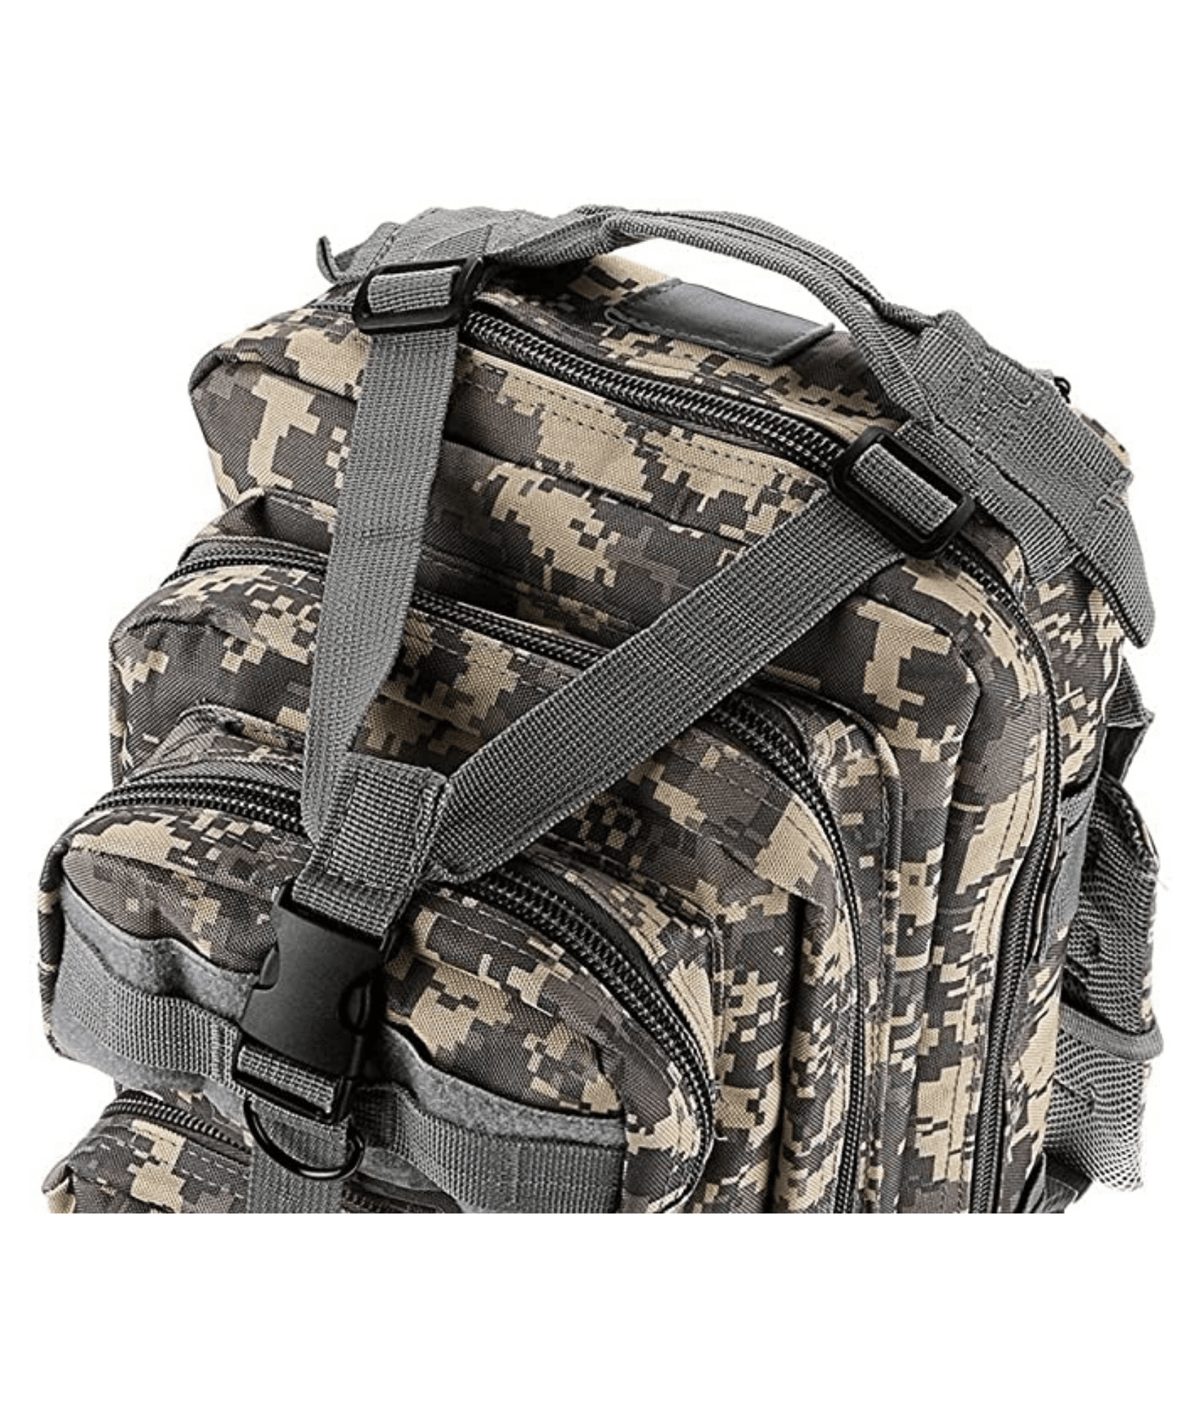 35l oxford 3p bags tactical backpack